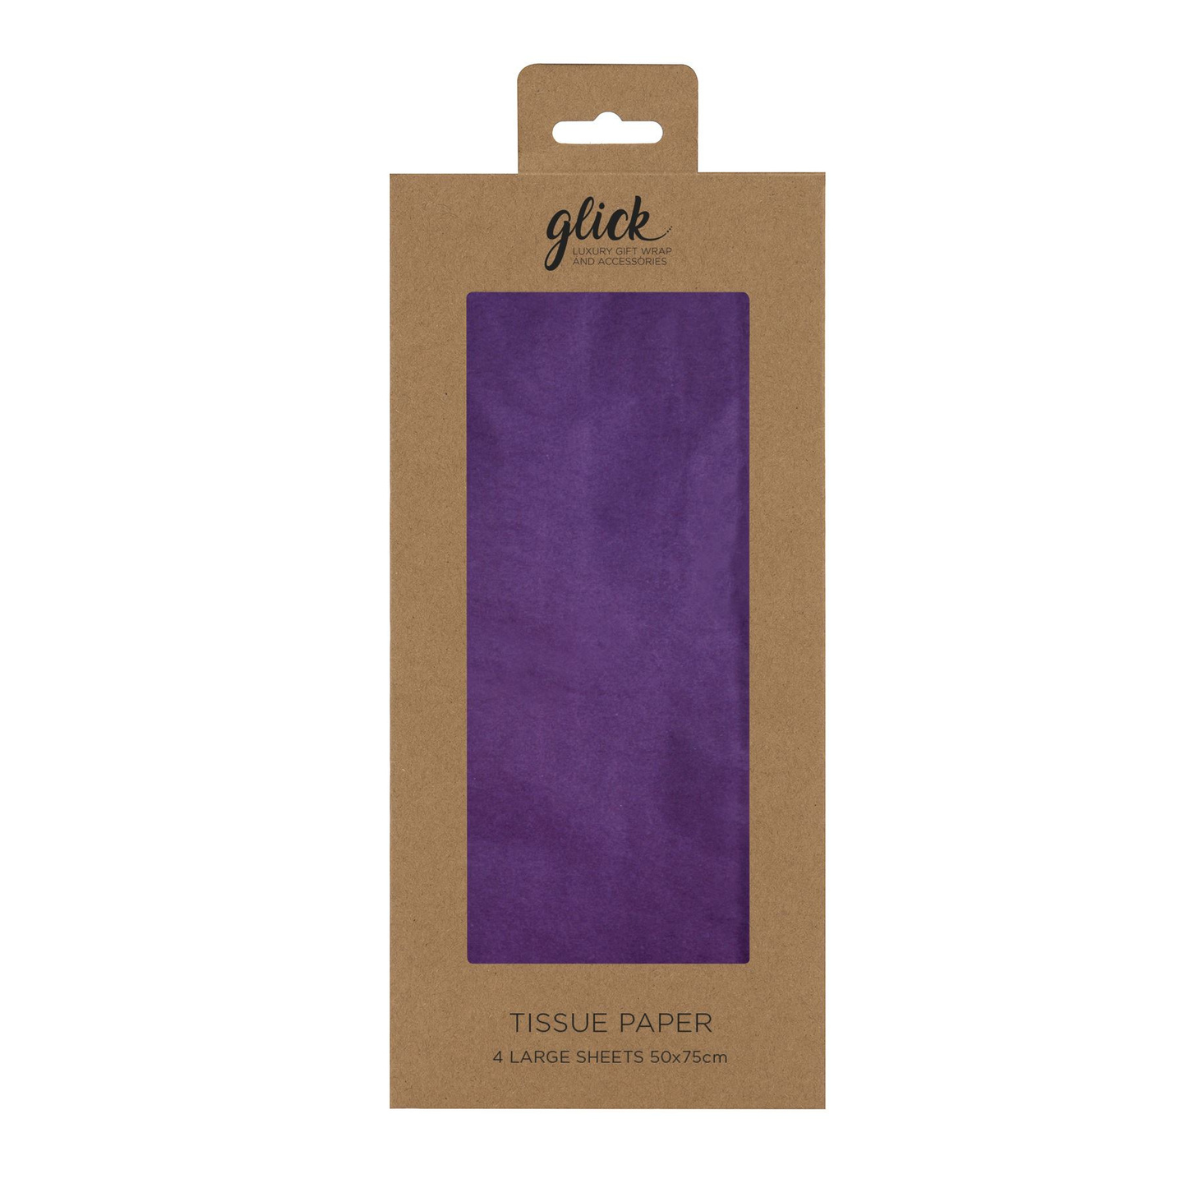 Image Of A Packet Of Violet Tissue Paper